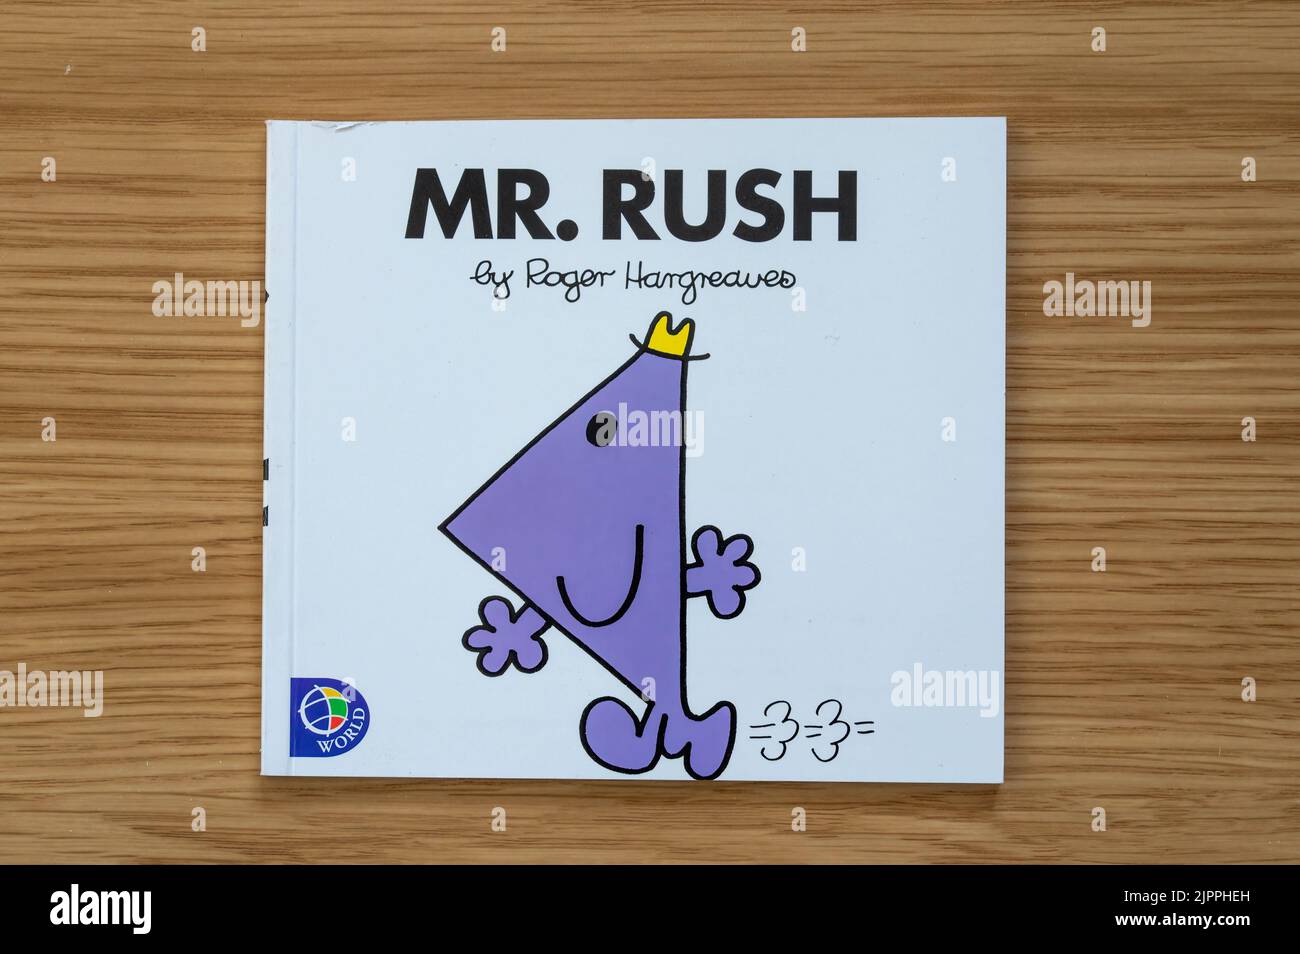 CHESTER, UNITED KINGDOM - JULY 31ST 2022: Mr Rush, front cover of Mr Men series of books Stock Photo